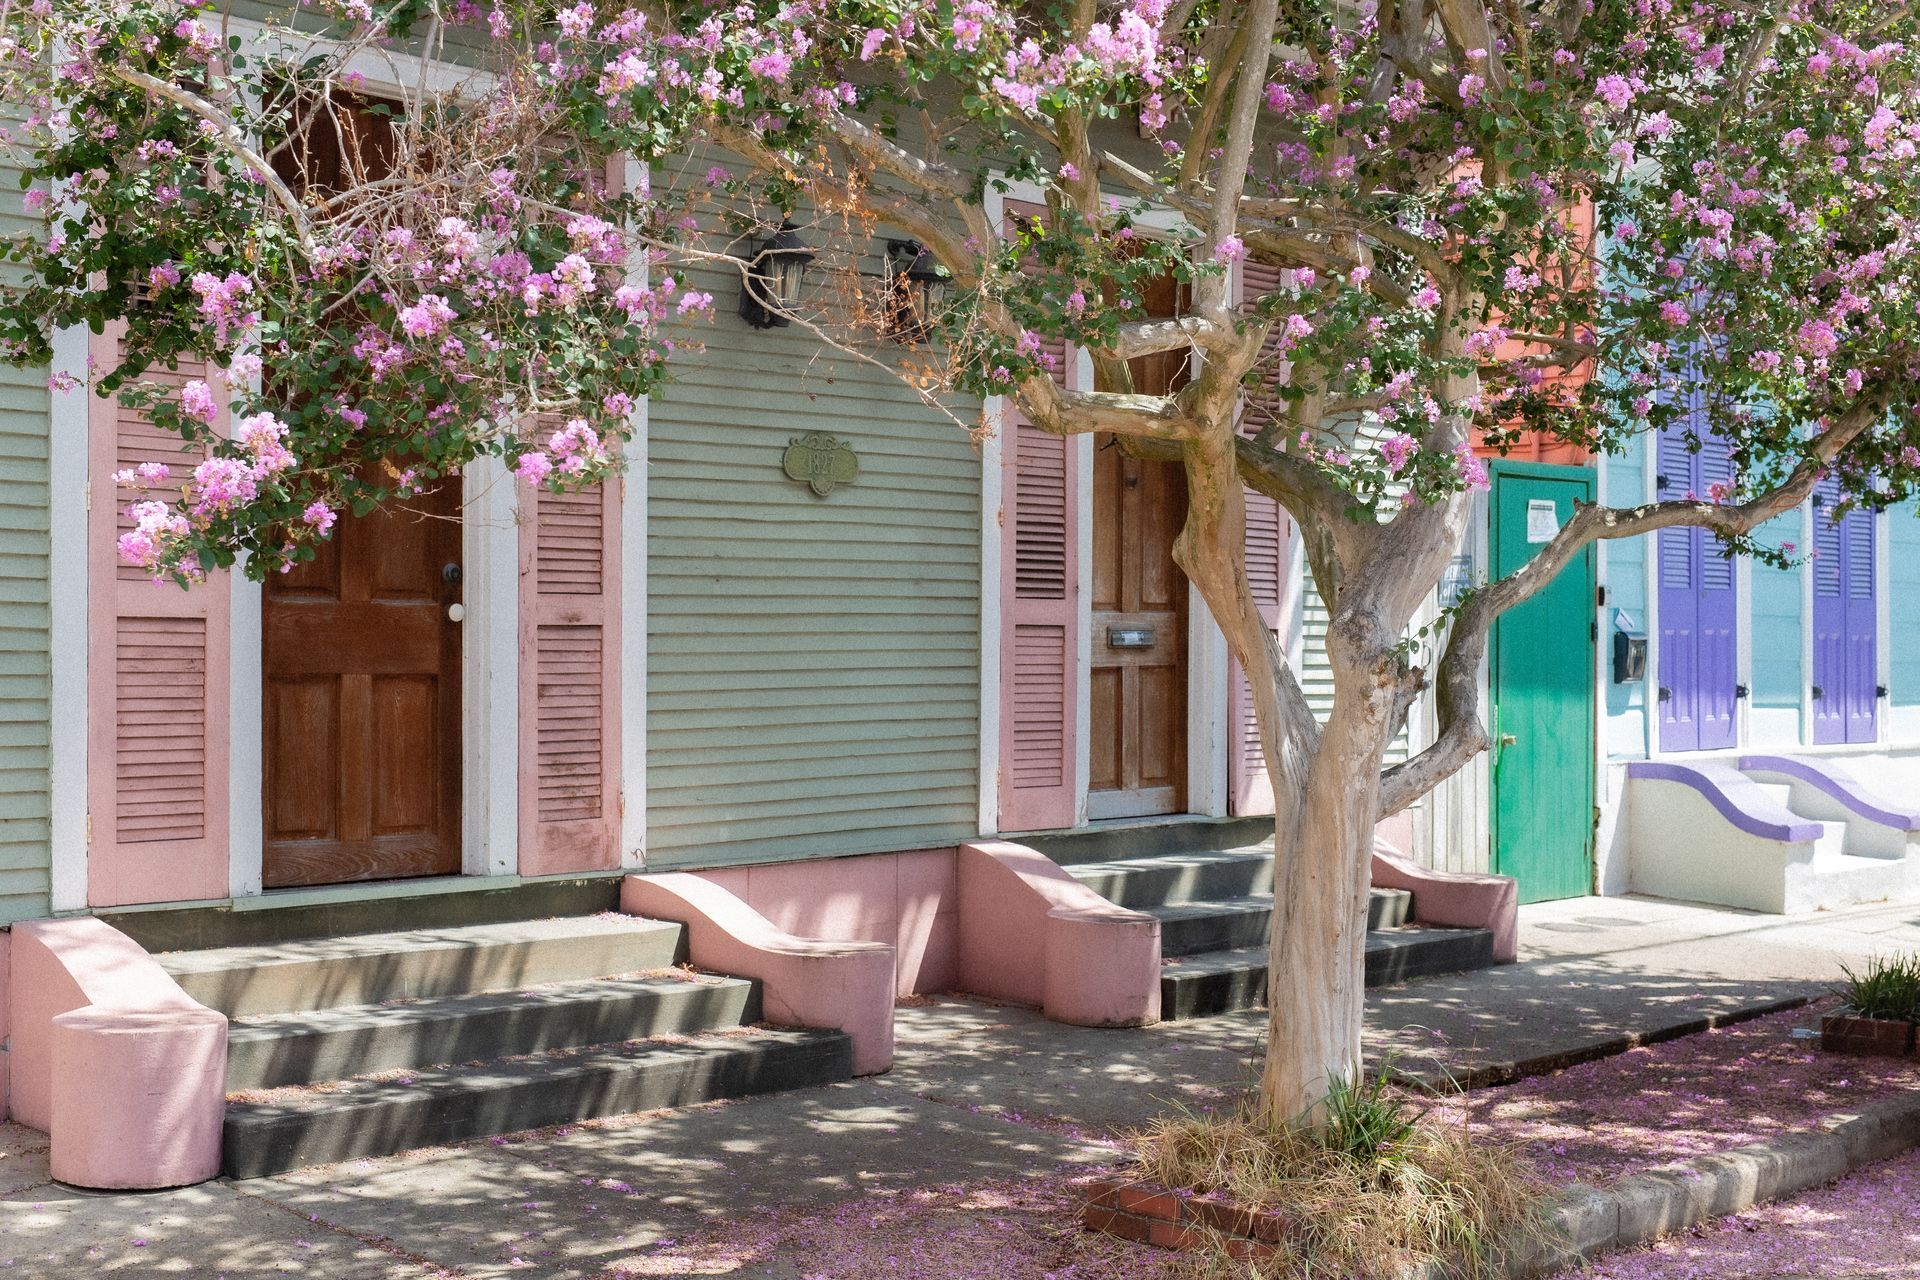 New Orleans style historic home in pastel colors with blooming japanese magnolia tree in the sidewalk